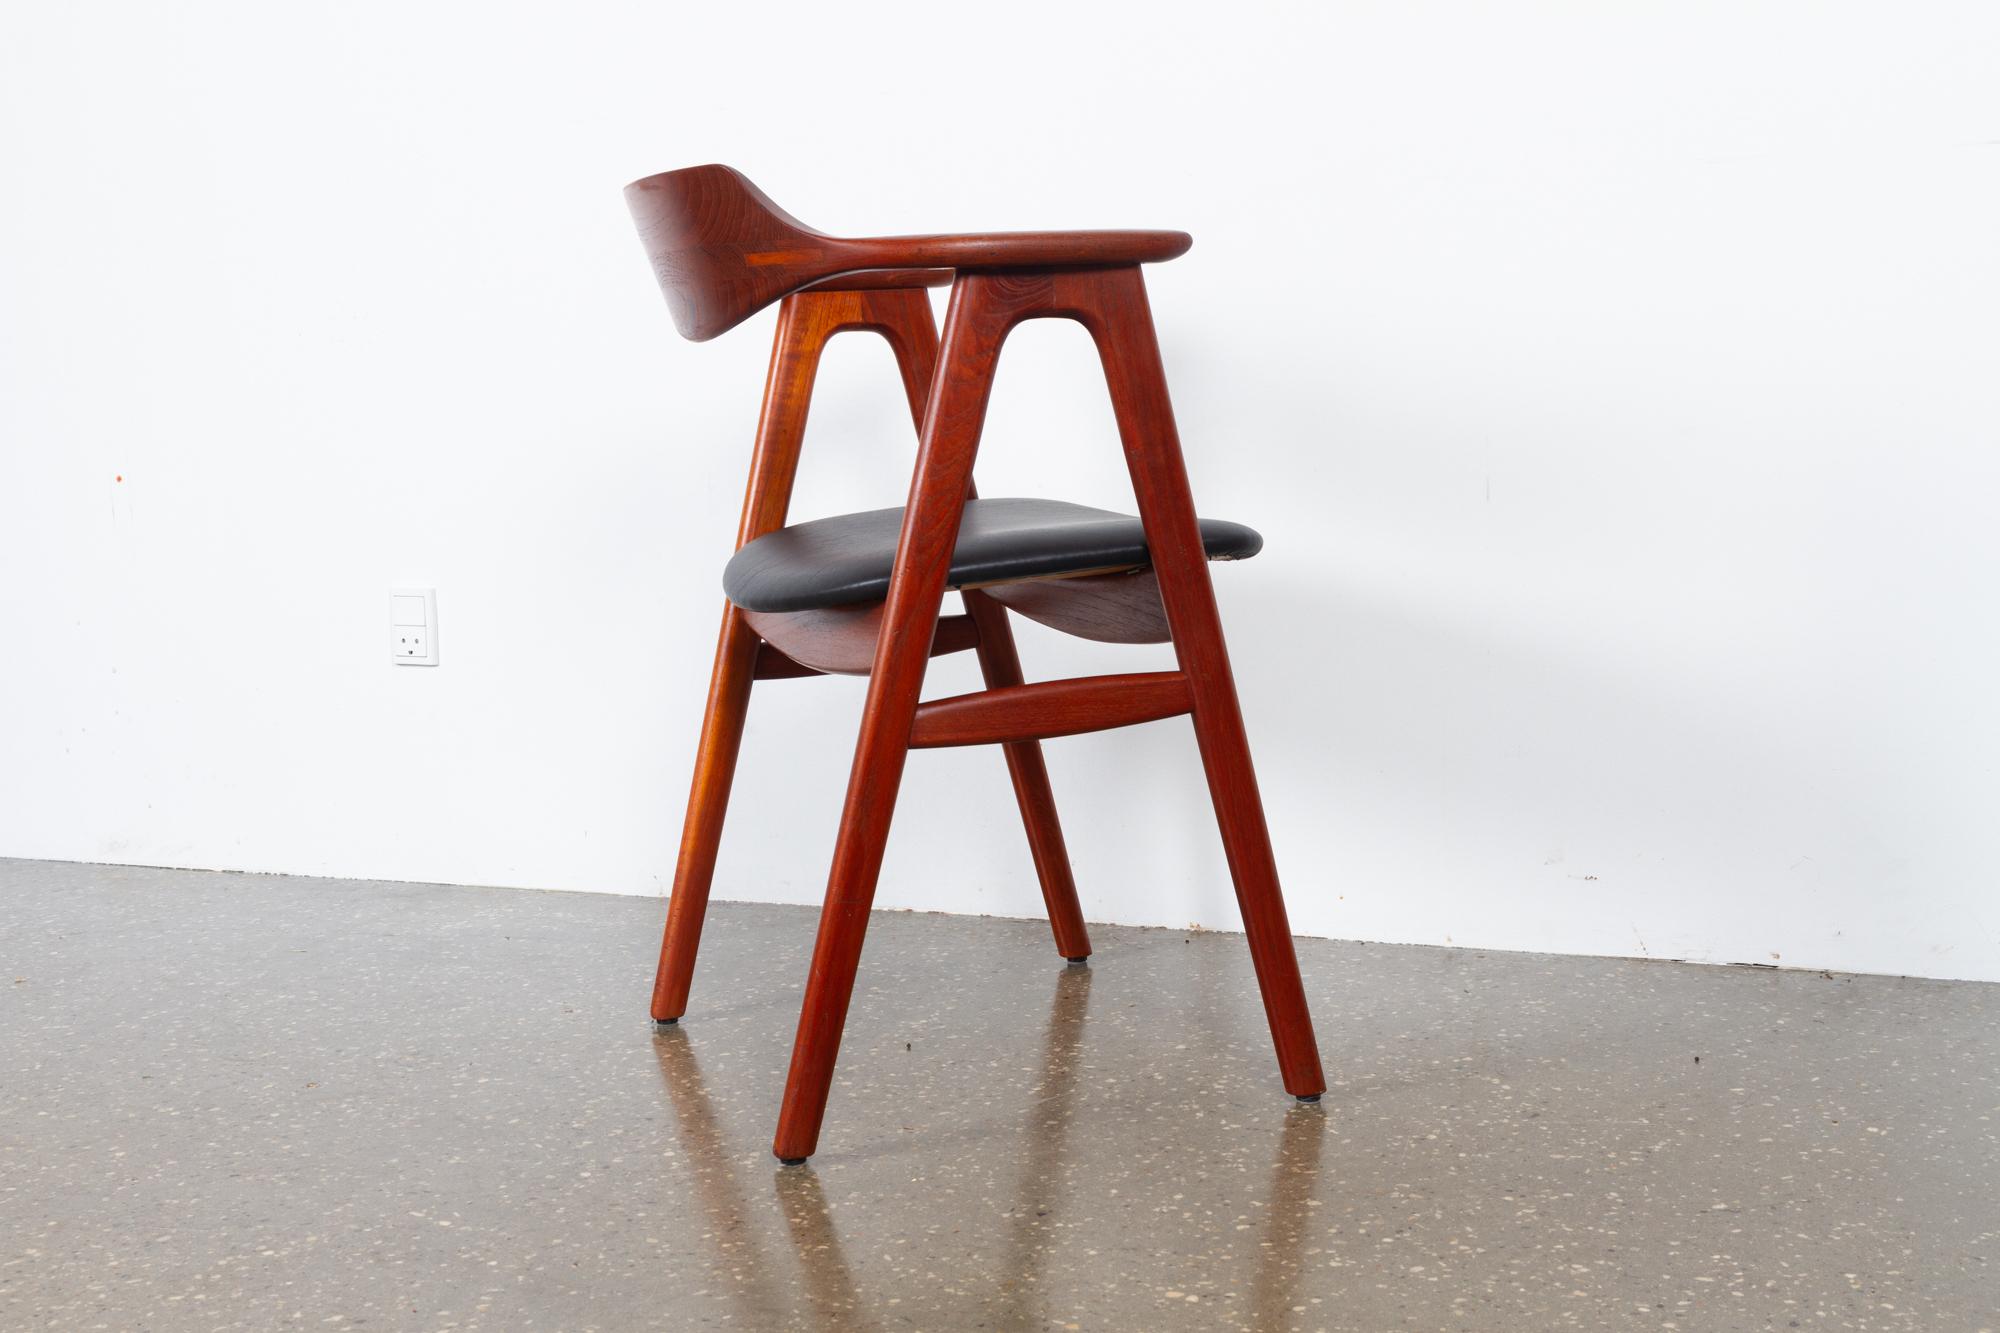 Vintage Danish teak armchair by Erik Kirkegaard for Høng Stolefabrik 1960s
Elegant Mid-Century Modern armchair in solid teak with beautiful joinery details. Seat is reupholstered with period correct leatherette and high density foam. Very